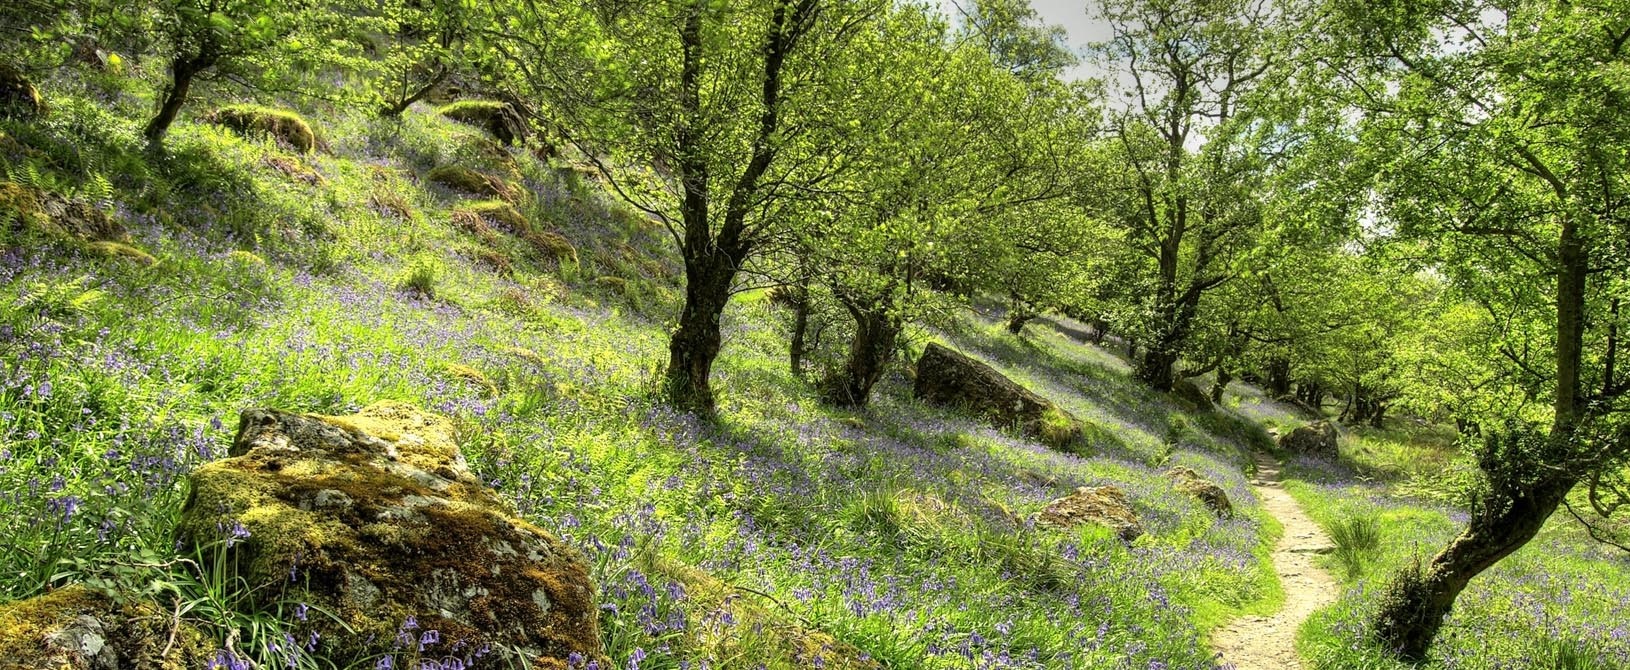 A quiet walkers path in the countryside with bluebells in bloom